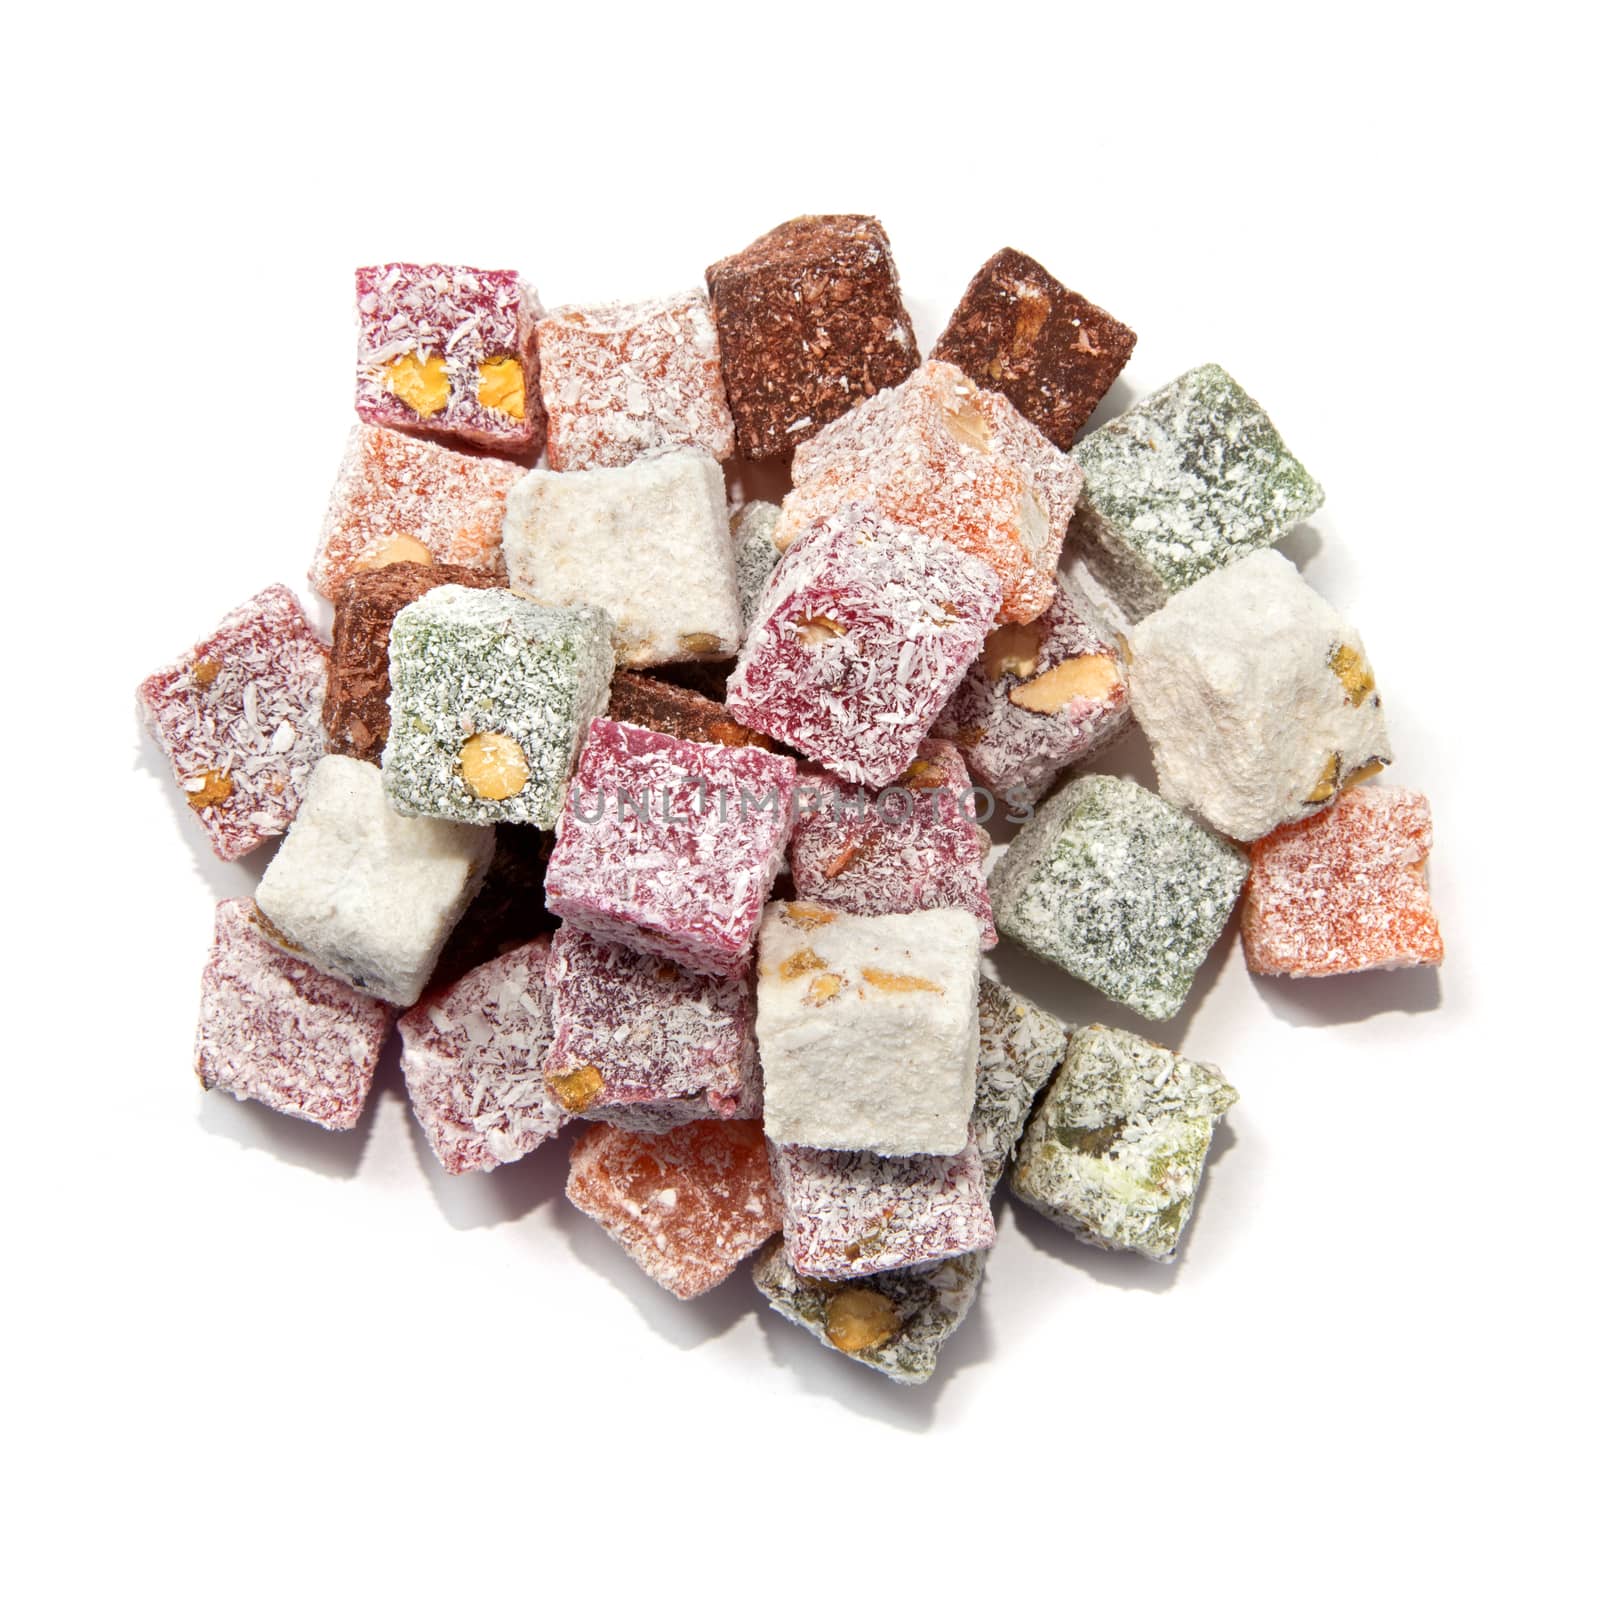 Turkish delight over white background, view from above